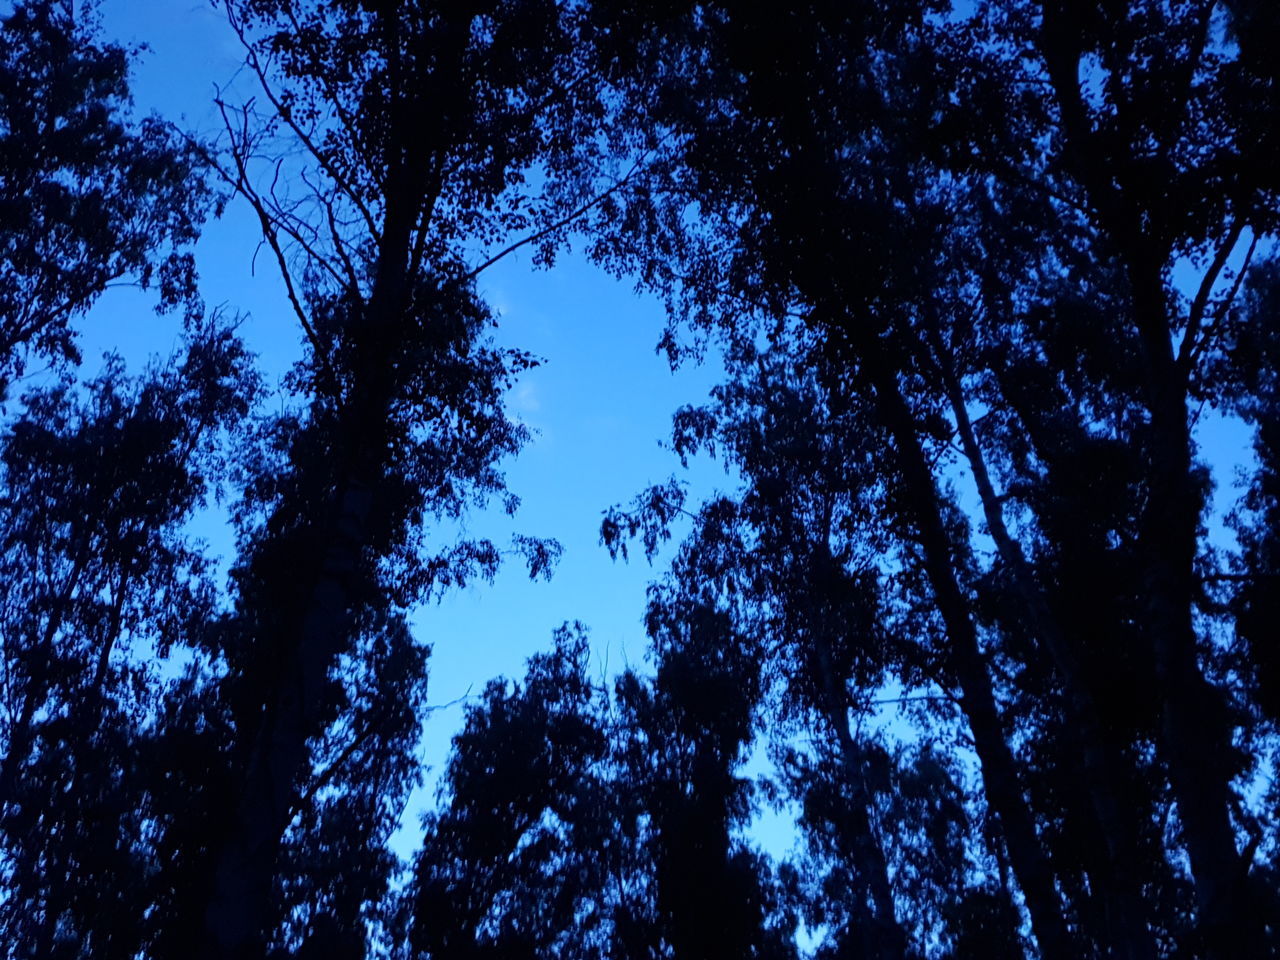 tree, plant, low angle view, sky, growth, tranquility, beauty in nature, blue, no people, nature, tranquil scene, silhouette, forest, scenics - nature, outdoors, land, night, clear sky, backgrounds, tree canopy